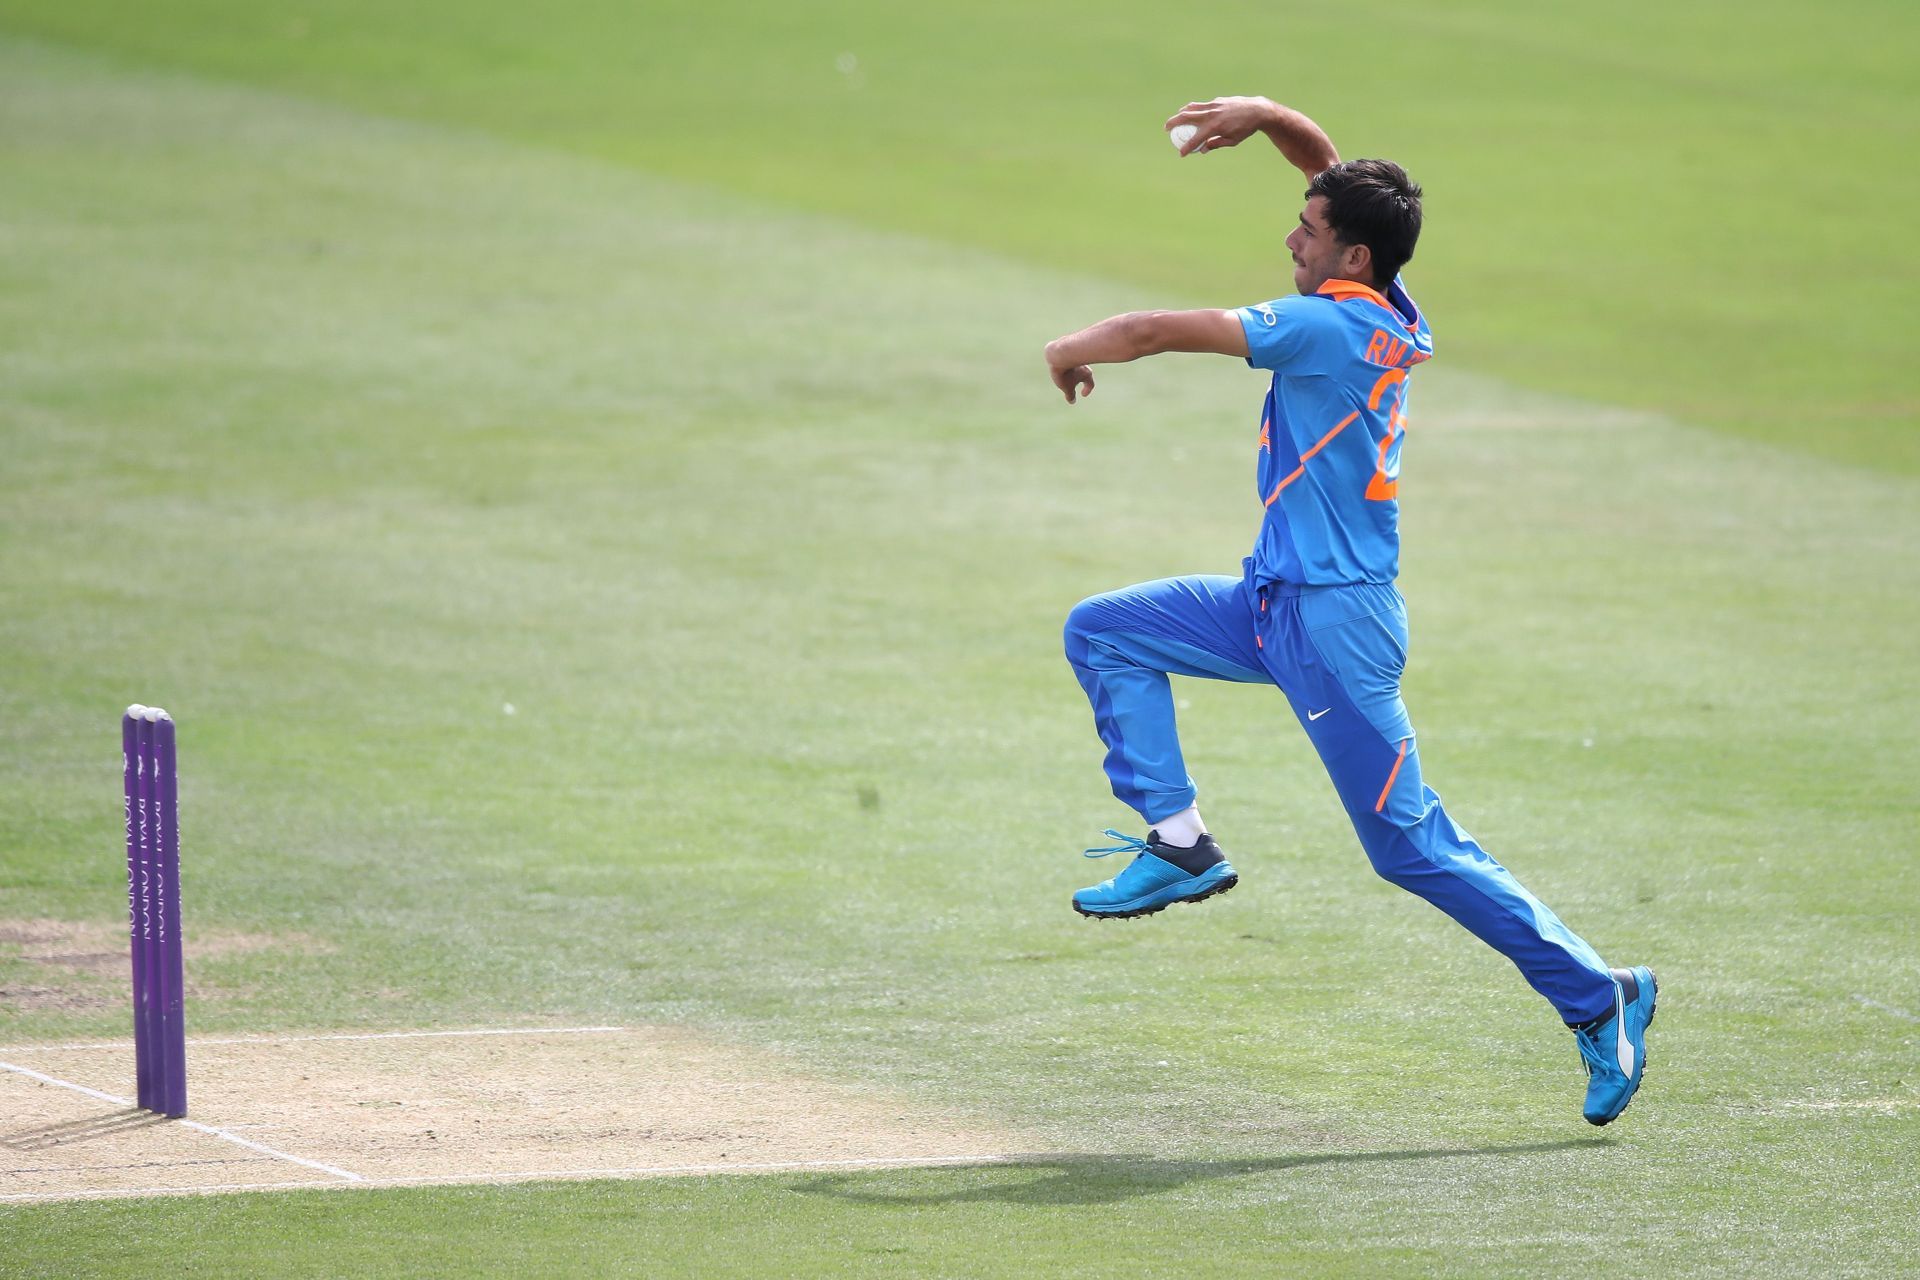 Ravi Bishnoi can be a great partner to Yuzvendra Chahal